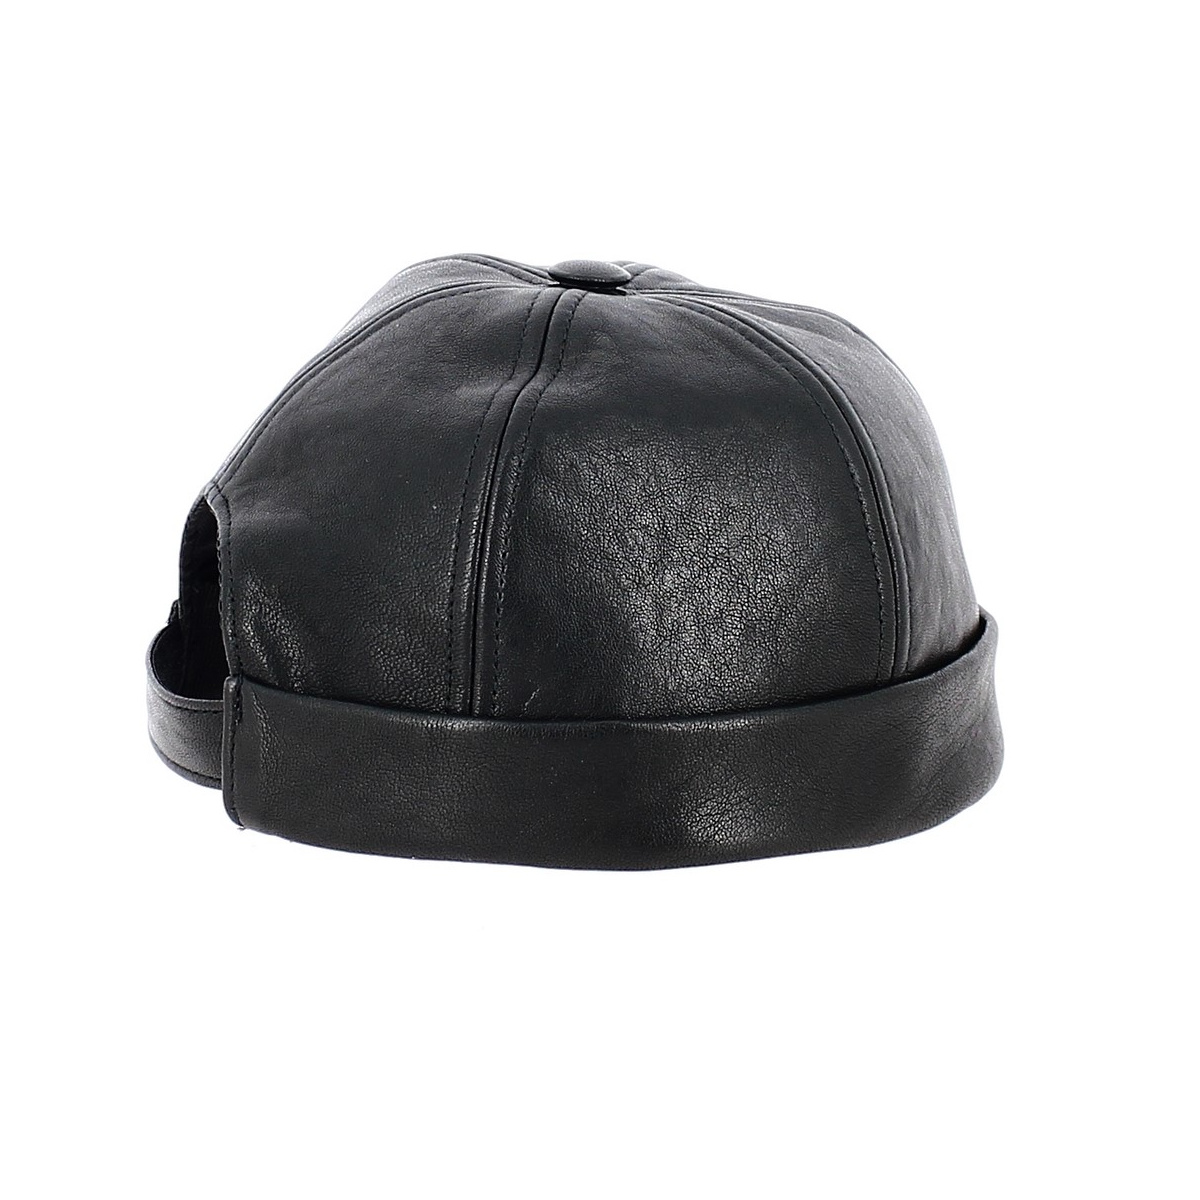 Docker Cap Nappa Black Leather - Traclet Reference : 12208 ...